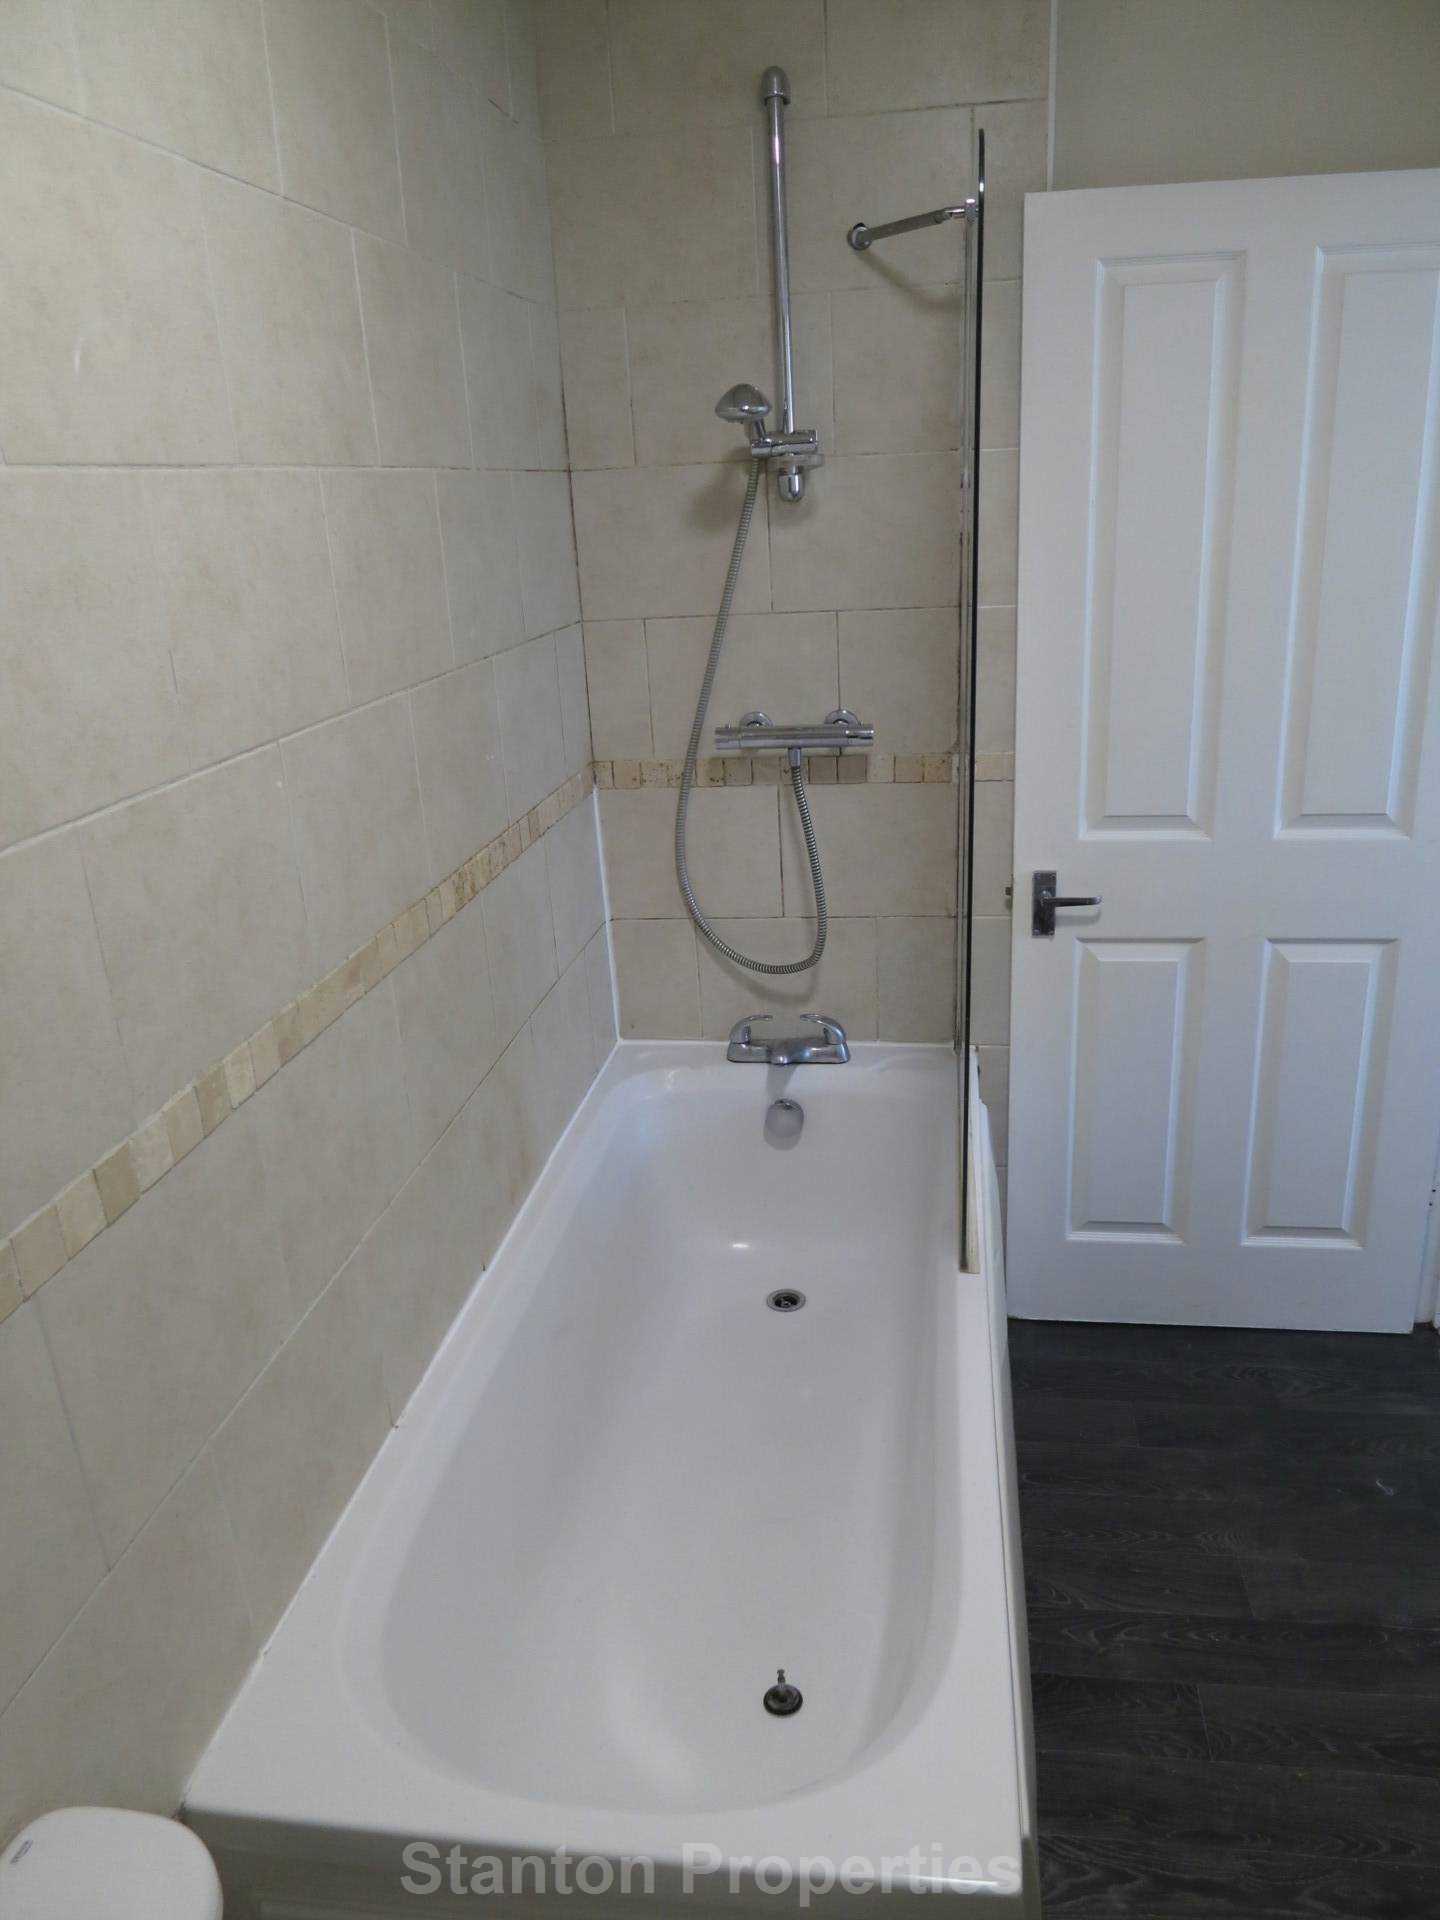 £120 pppw excluding bills, Copson Street, Withington, Image 12